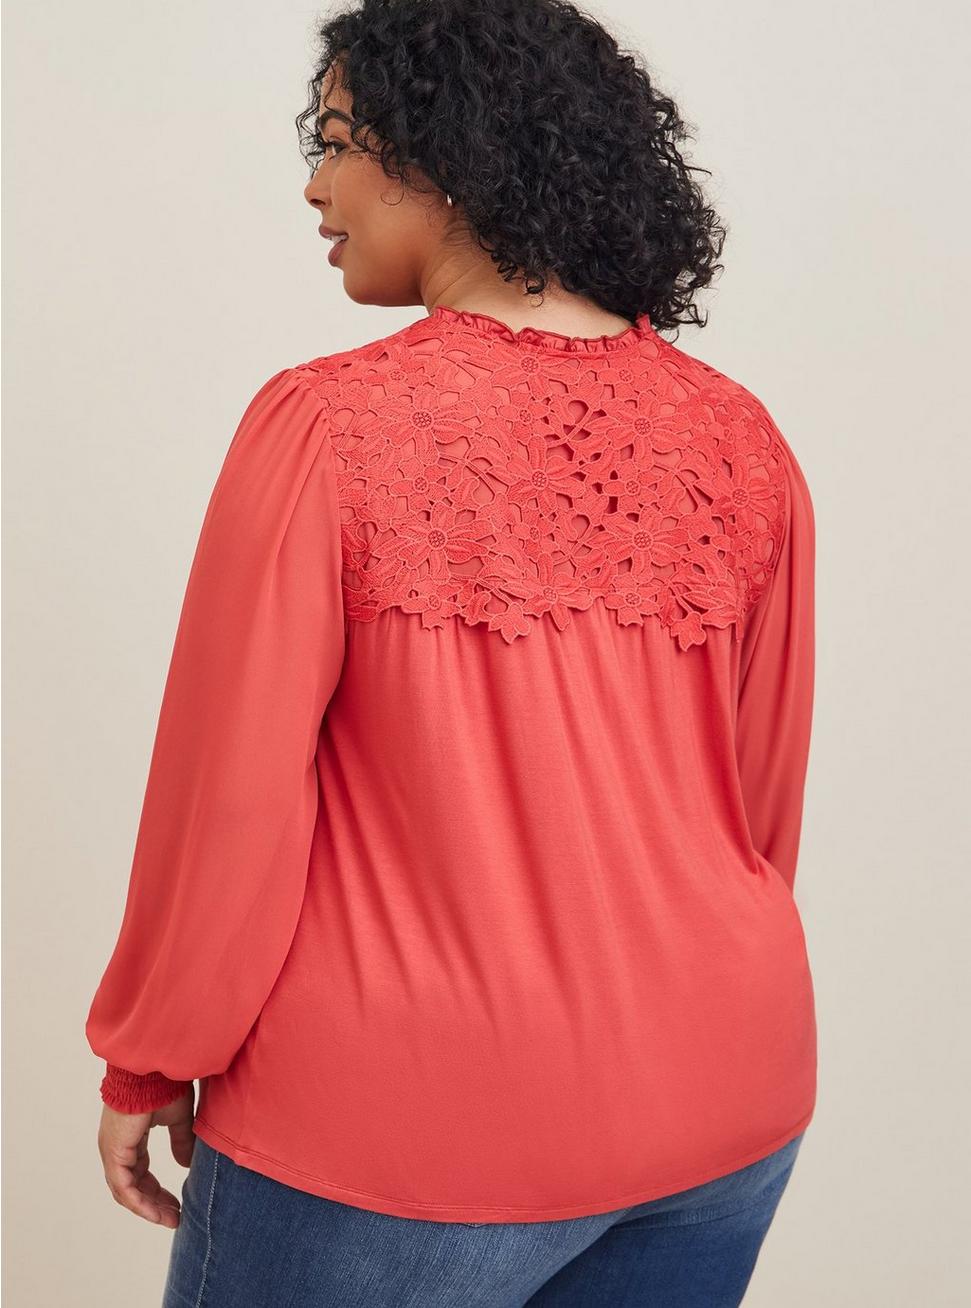 Super Soft Chiffon Sleeve Lace Inset Tie Detail Top , BAKED APPLE, alternate